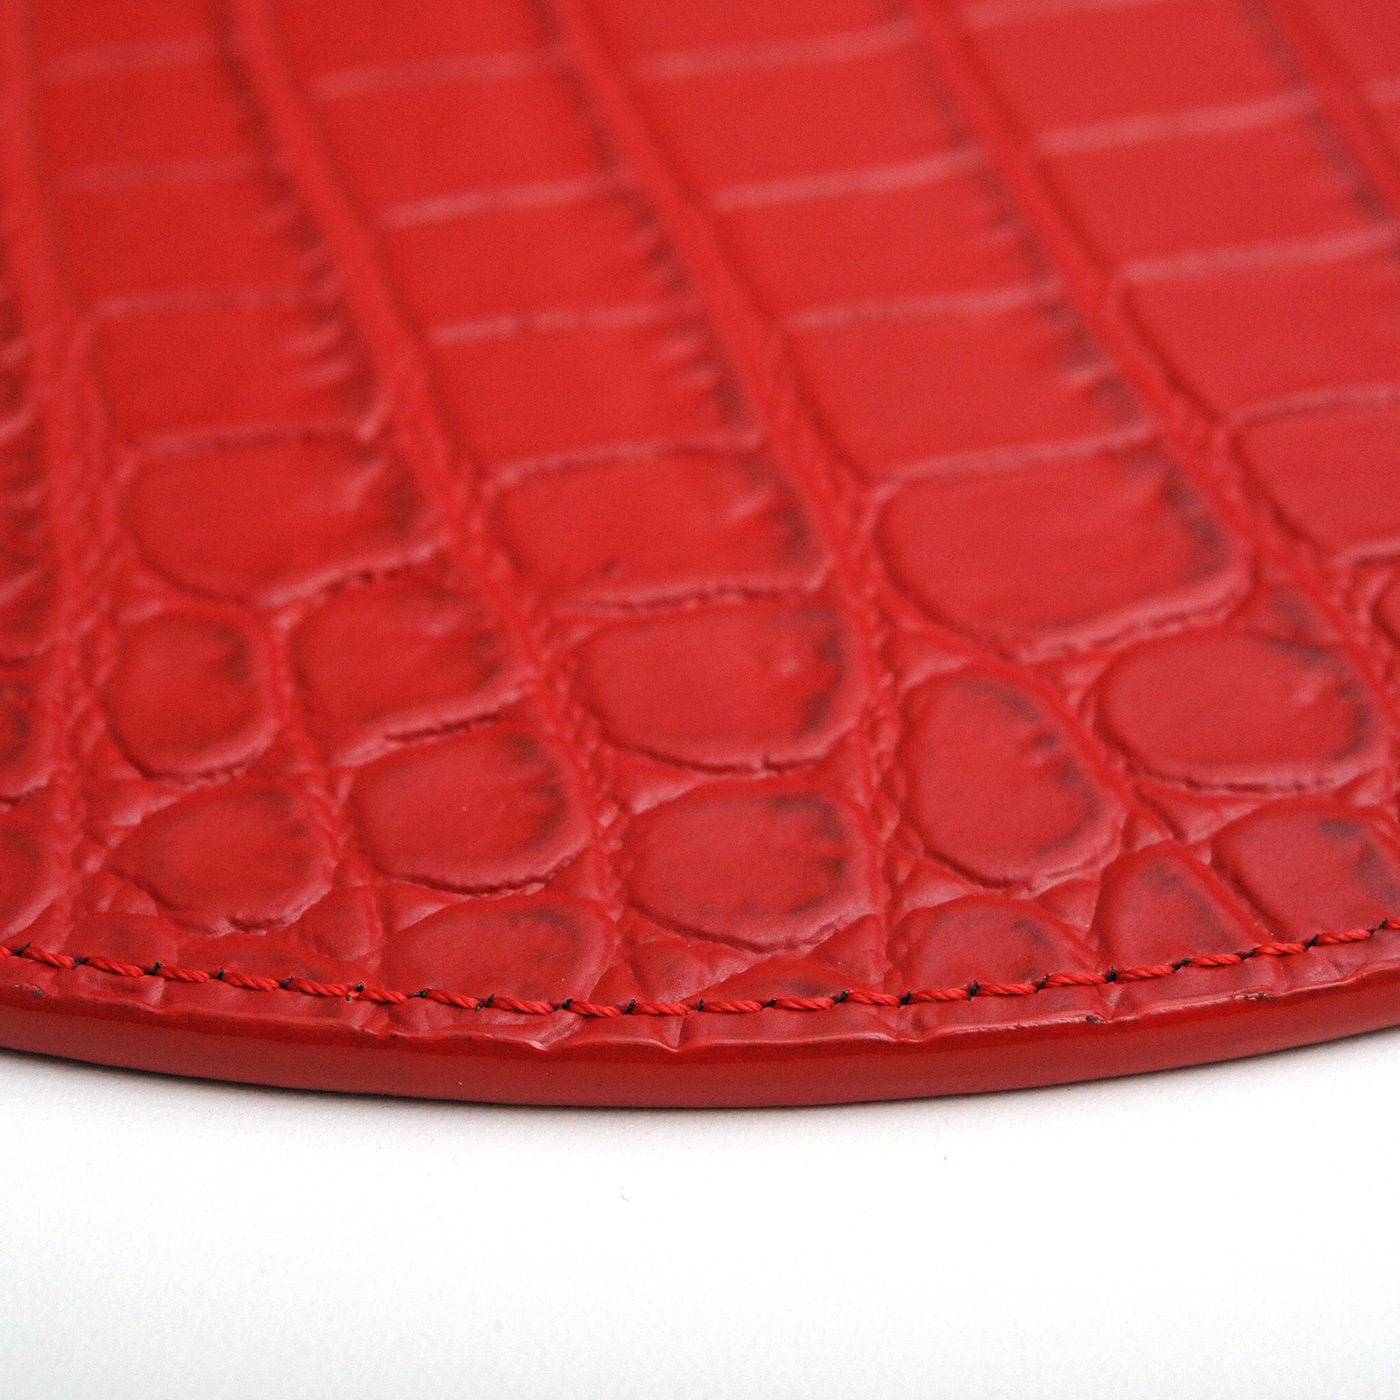 Kenya Small Set of 2 Round Red Leather Placemats - Alternative view 2